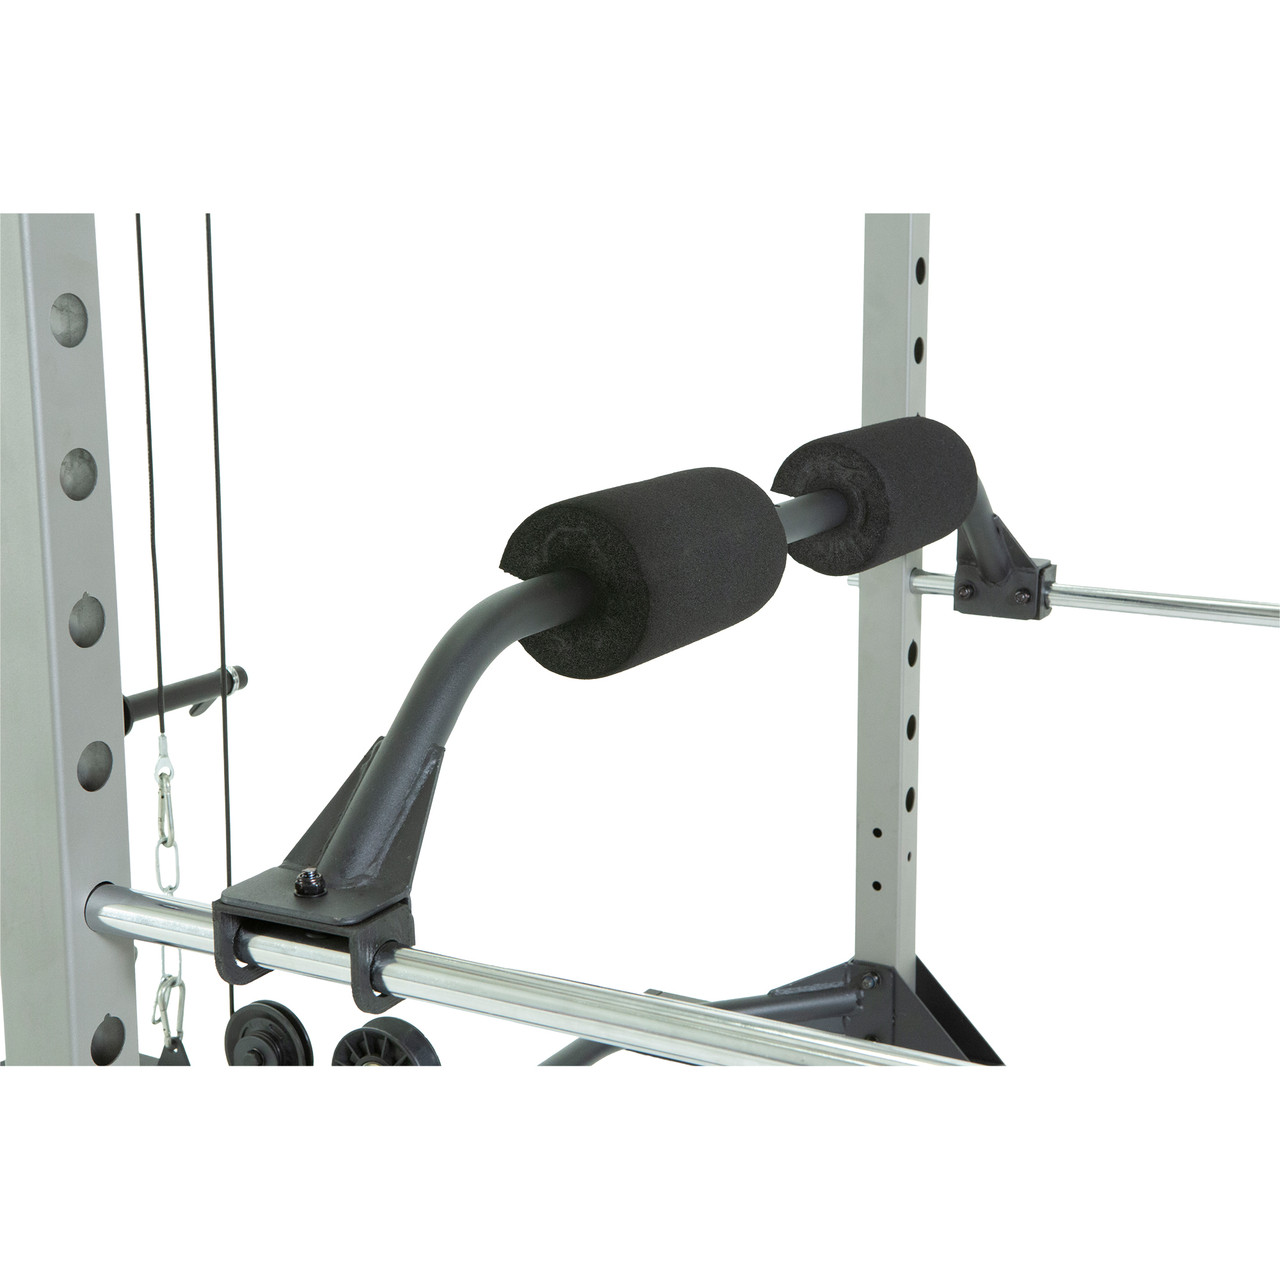 Fitness Reality Squat Rack Combo with Lat Pull-Down and Cable Cross Over  Attachment